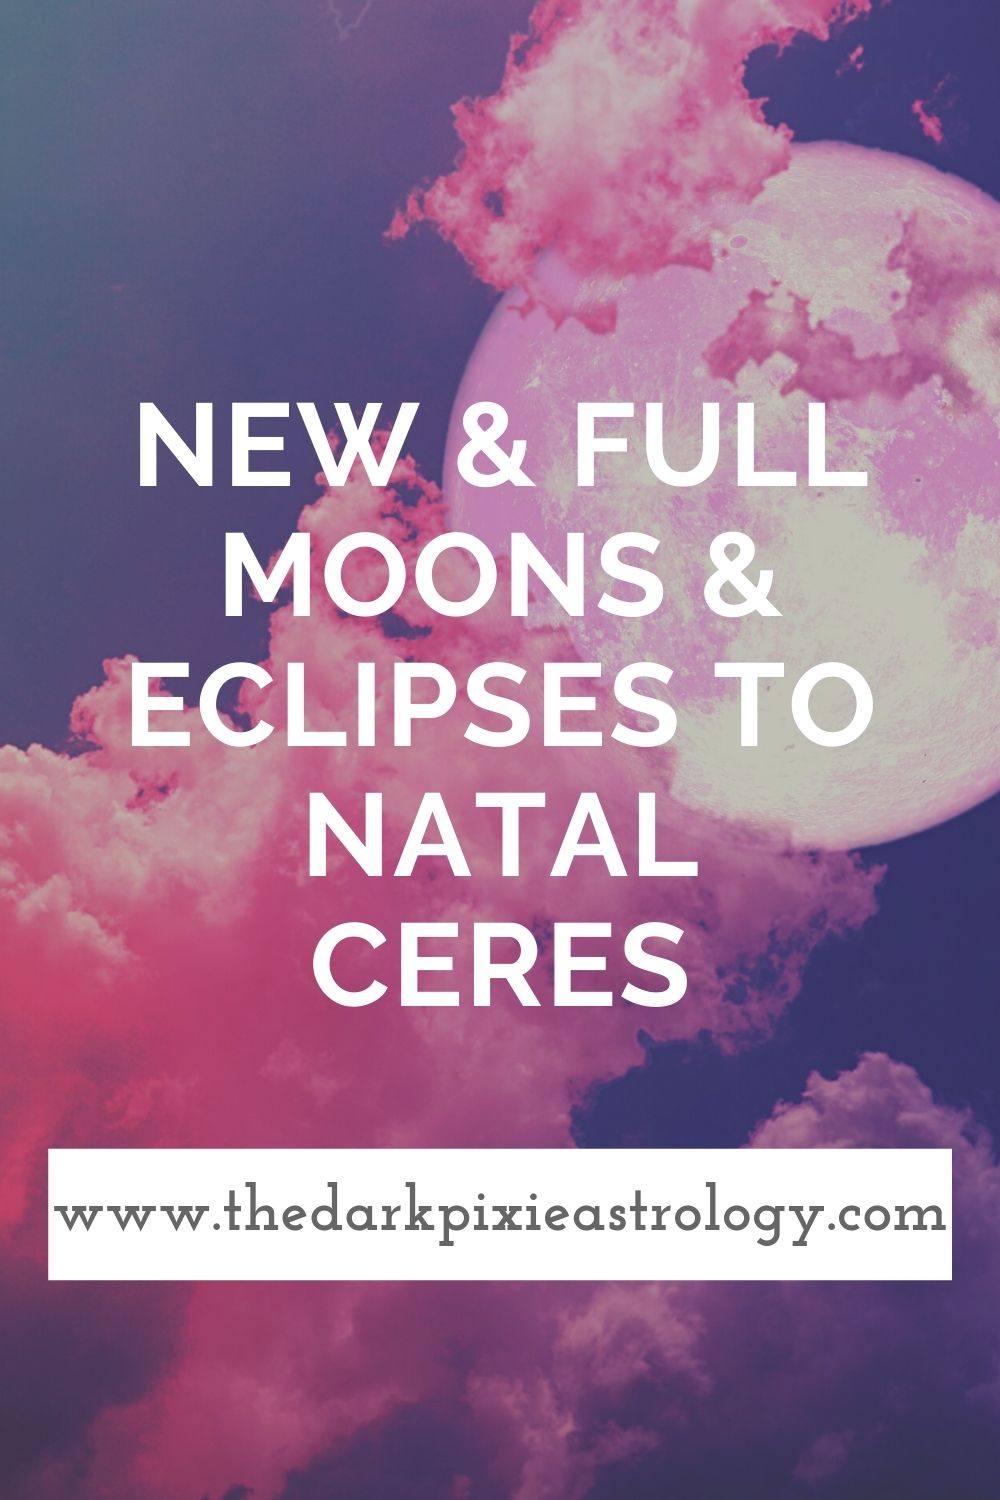 New & Full Moons & Eclipses to Natal Ceres - The Dark Pixie Astrology